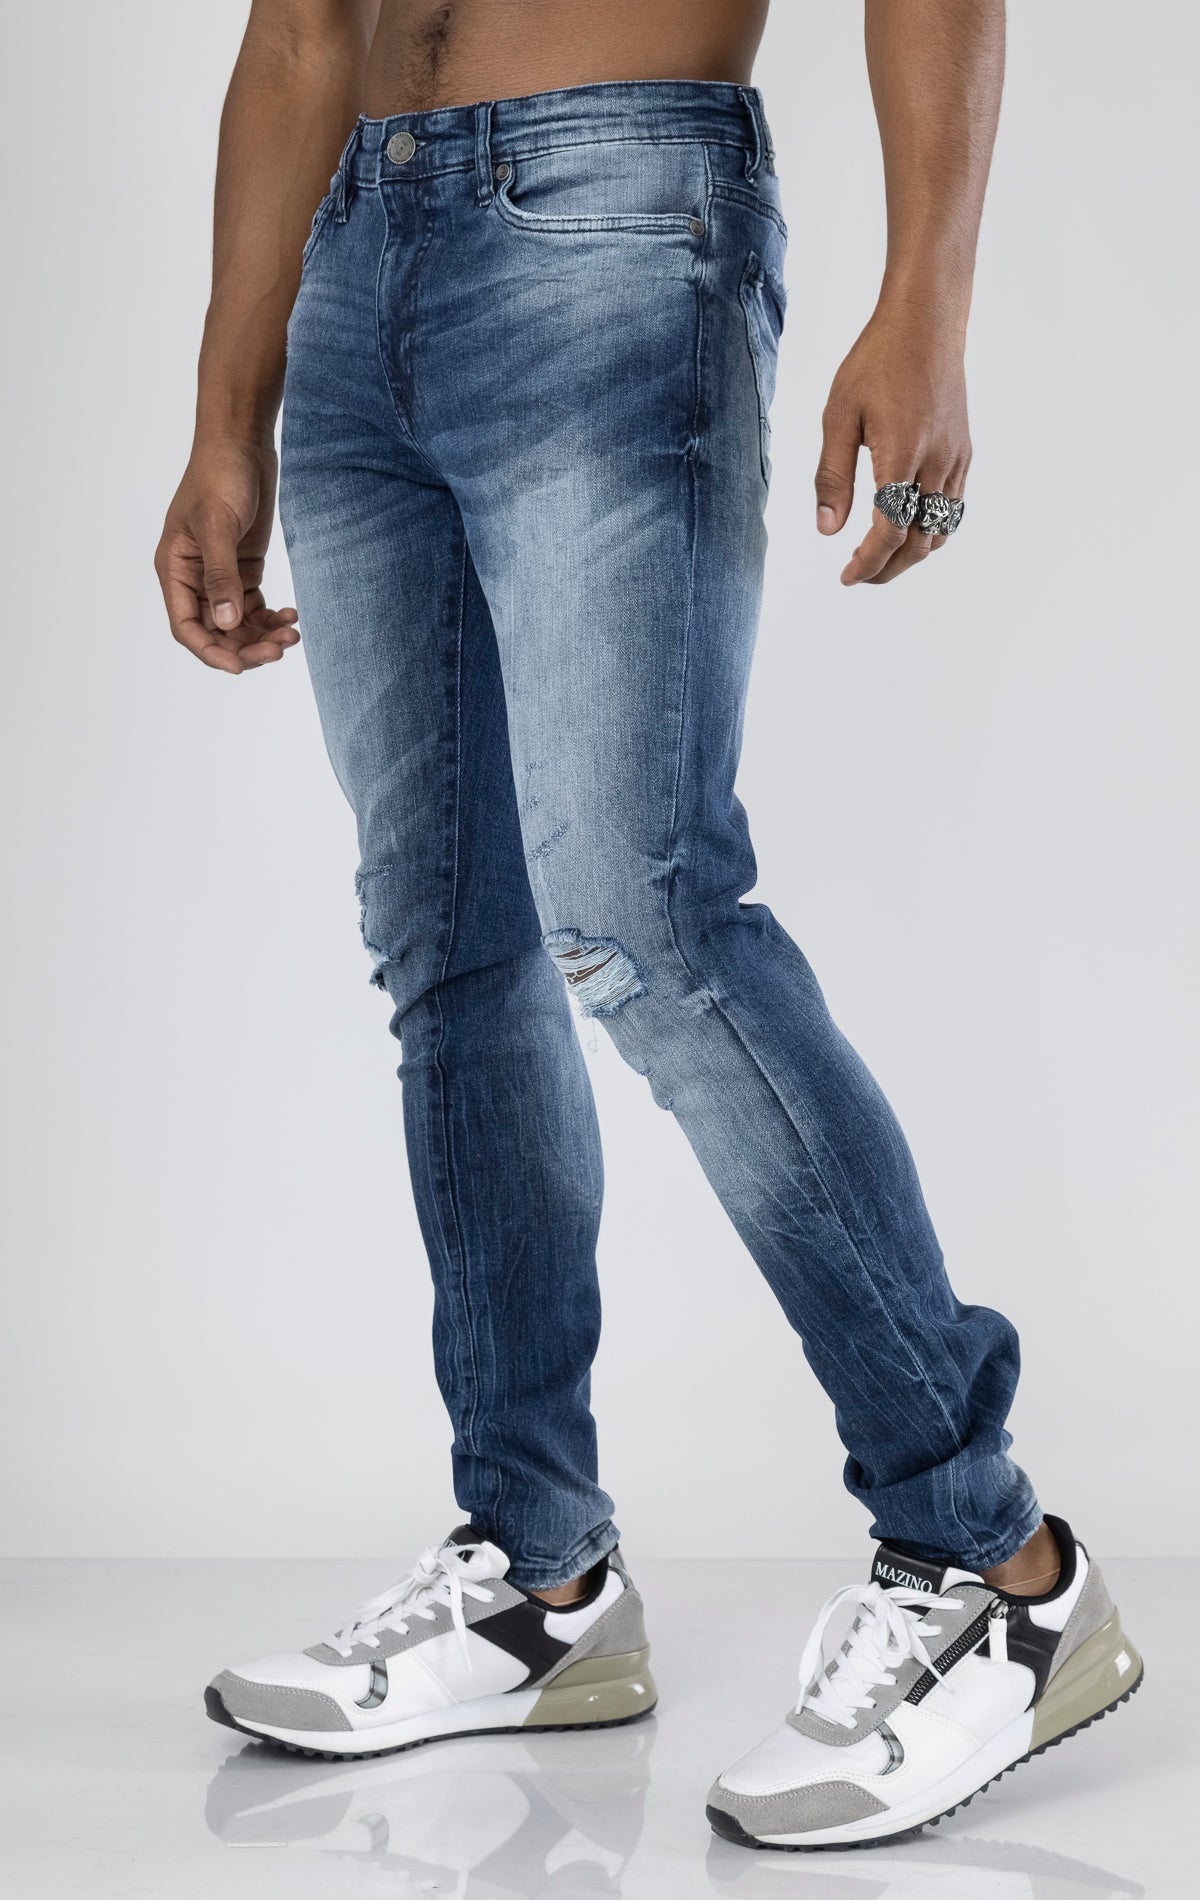 Men's ripped and distressed denim pants in a variety of washes. The pants feature a regular rise, tapered fit from the knee down, open rips at the knees, unique distressing details, and are made from 98% cotton with 2% lycra for stretch